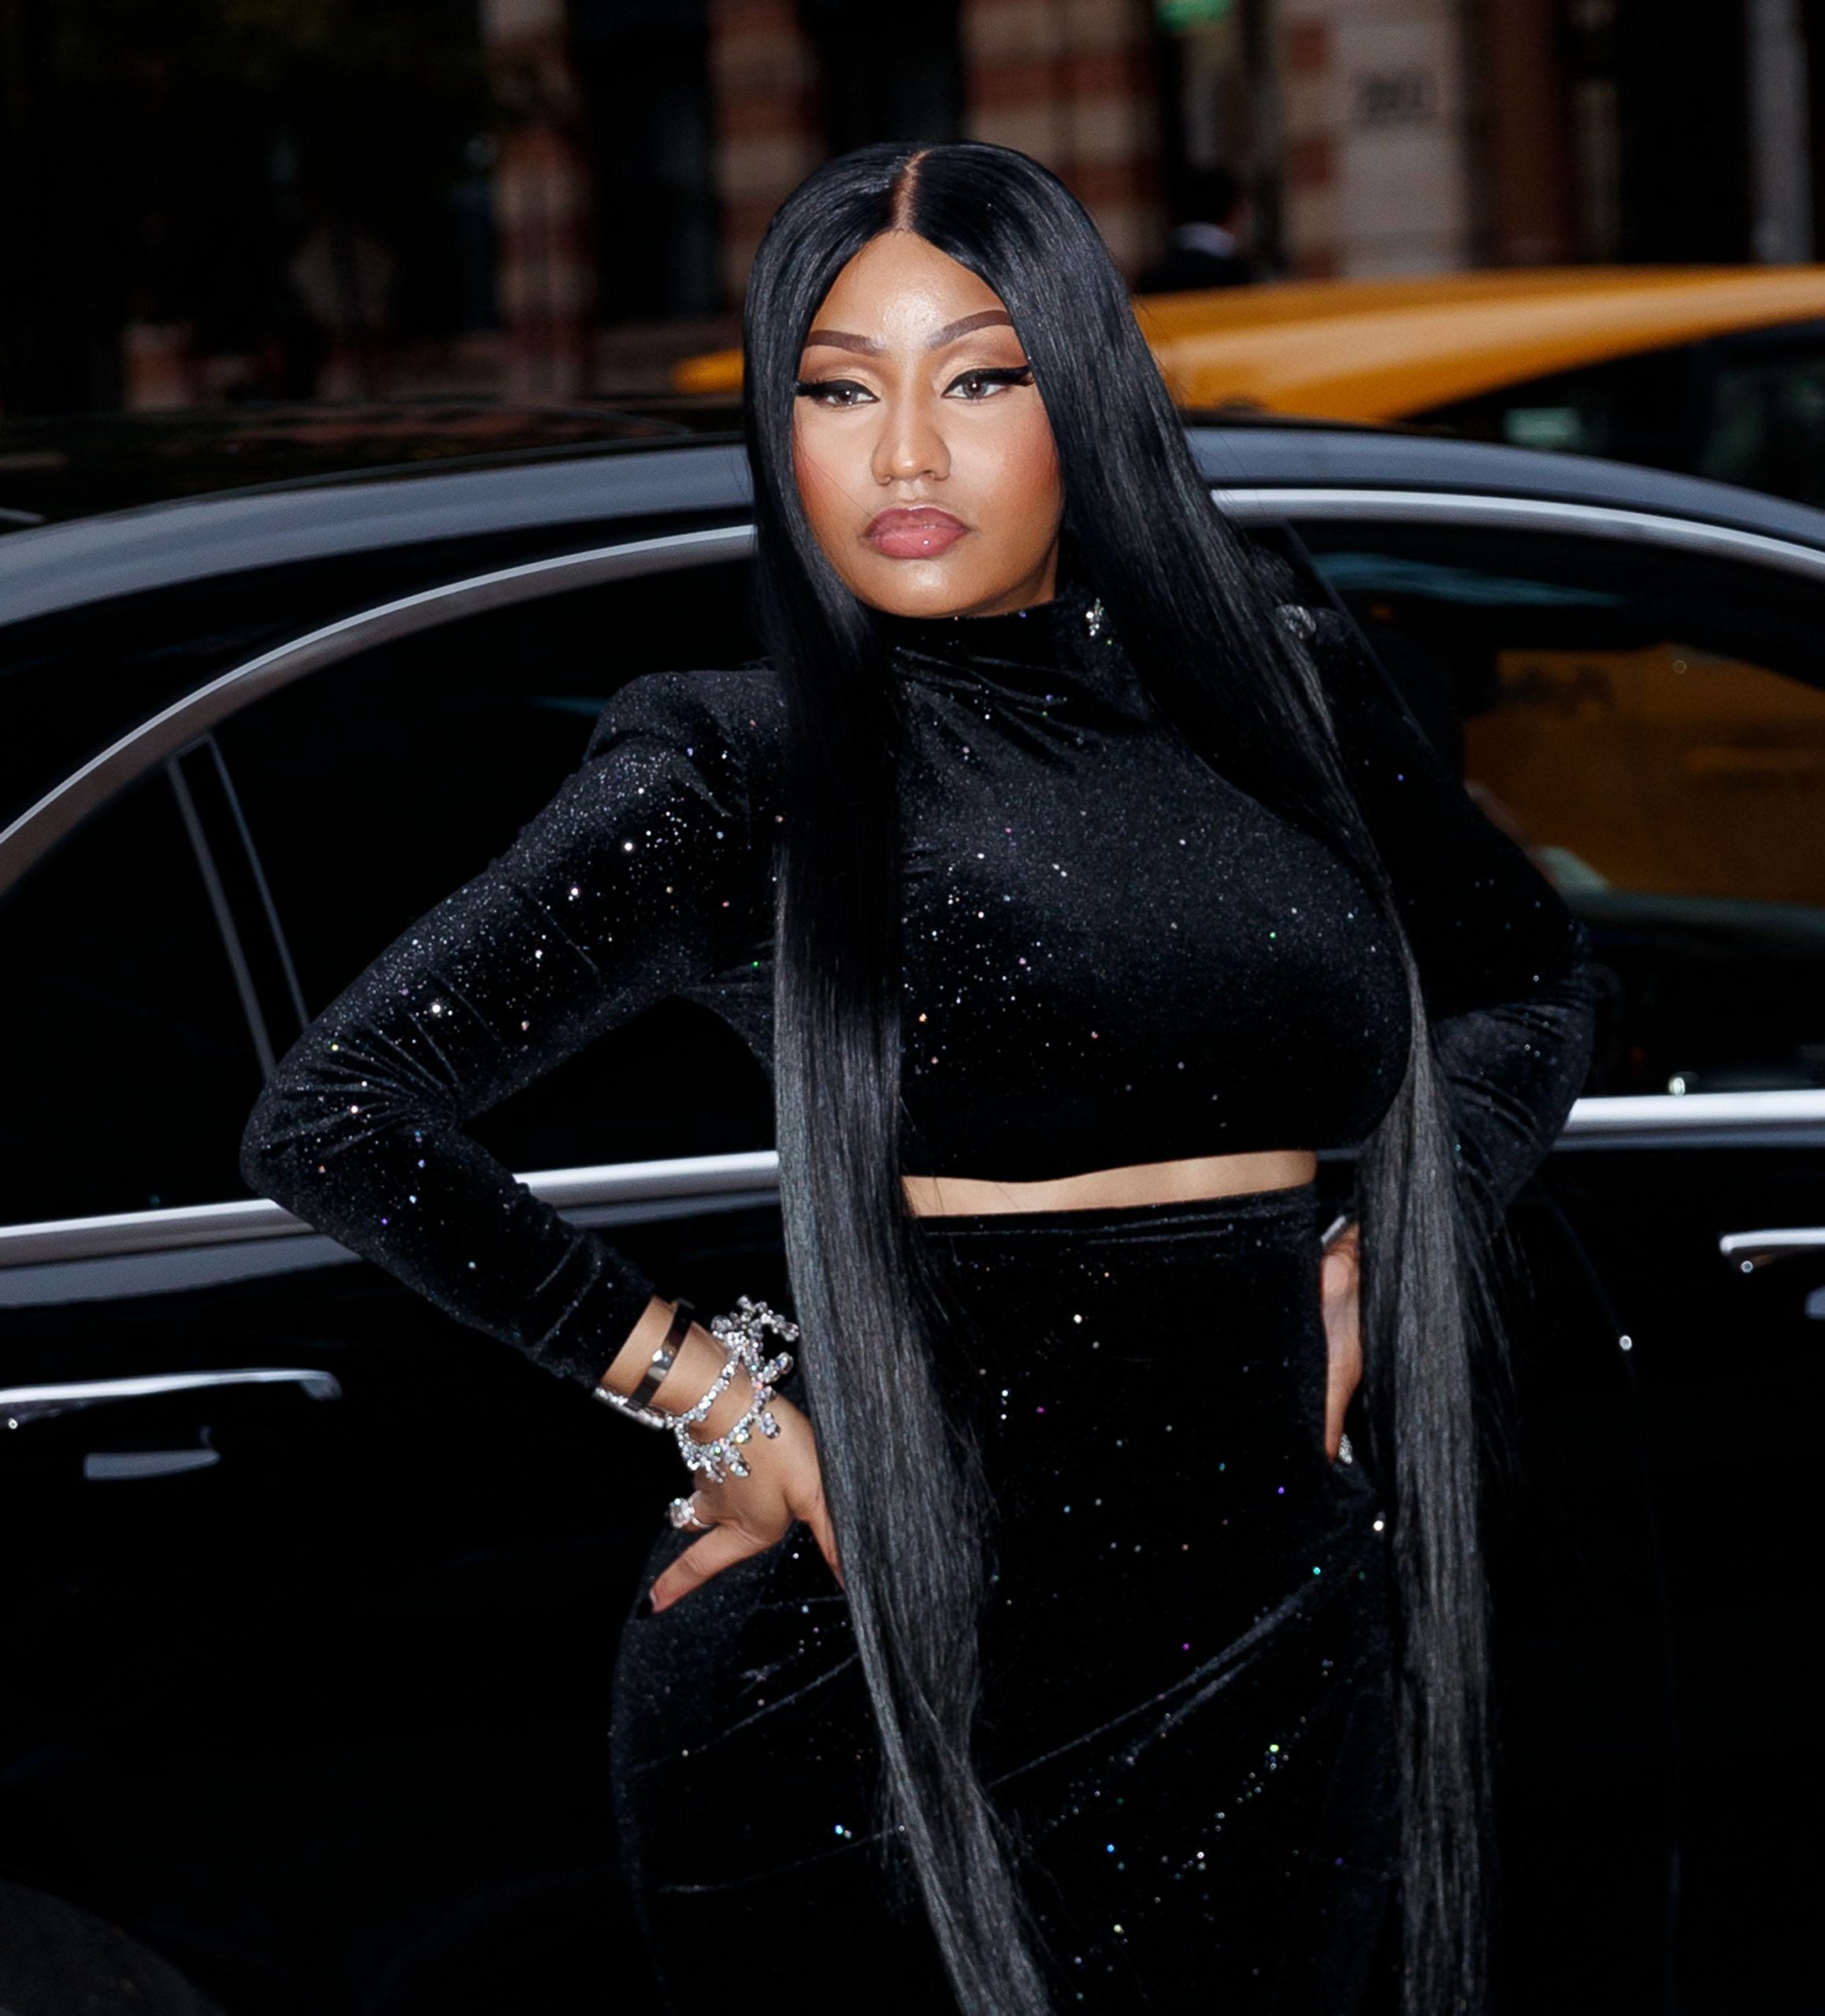 Nicki Minaj Is Rescheduling The North American Leg Of Her Tour To 2019 With...